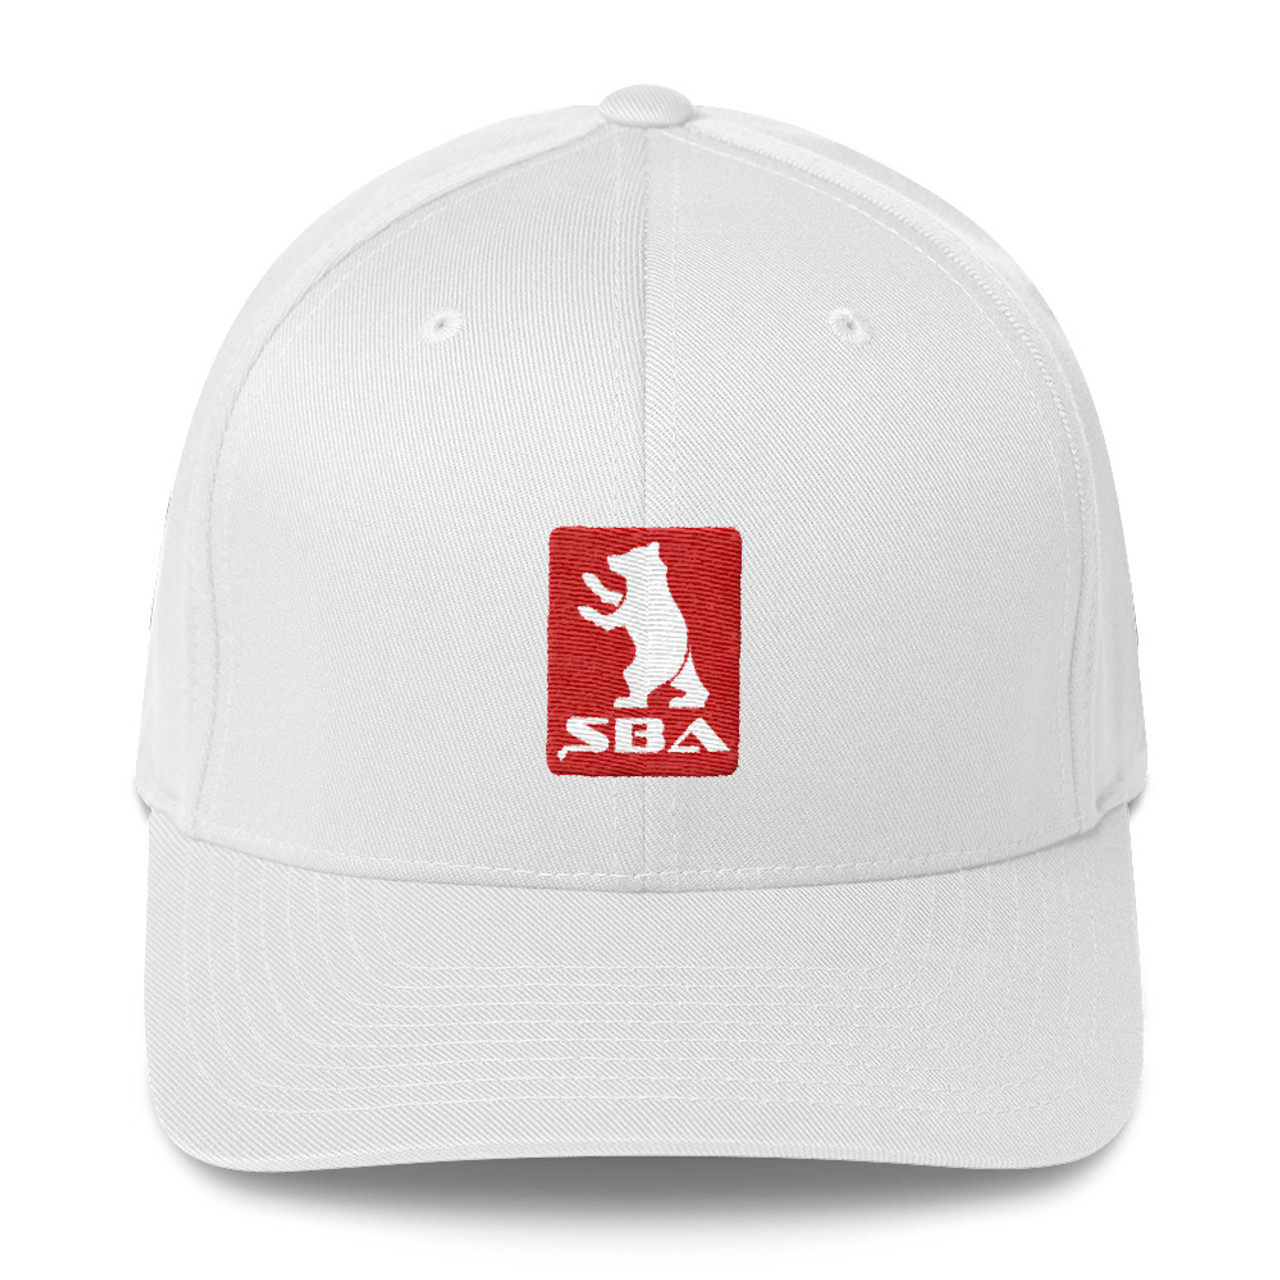 Panel Structured Cap Series 6 Classic SBA Gear - in Twill White